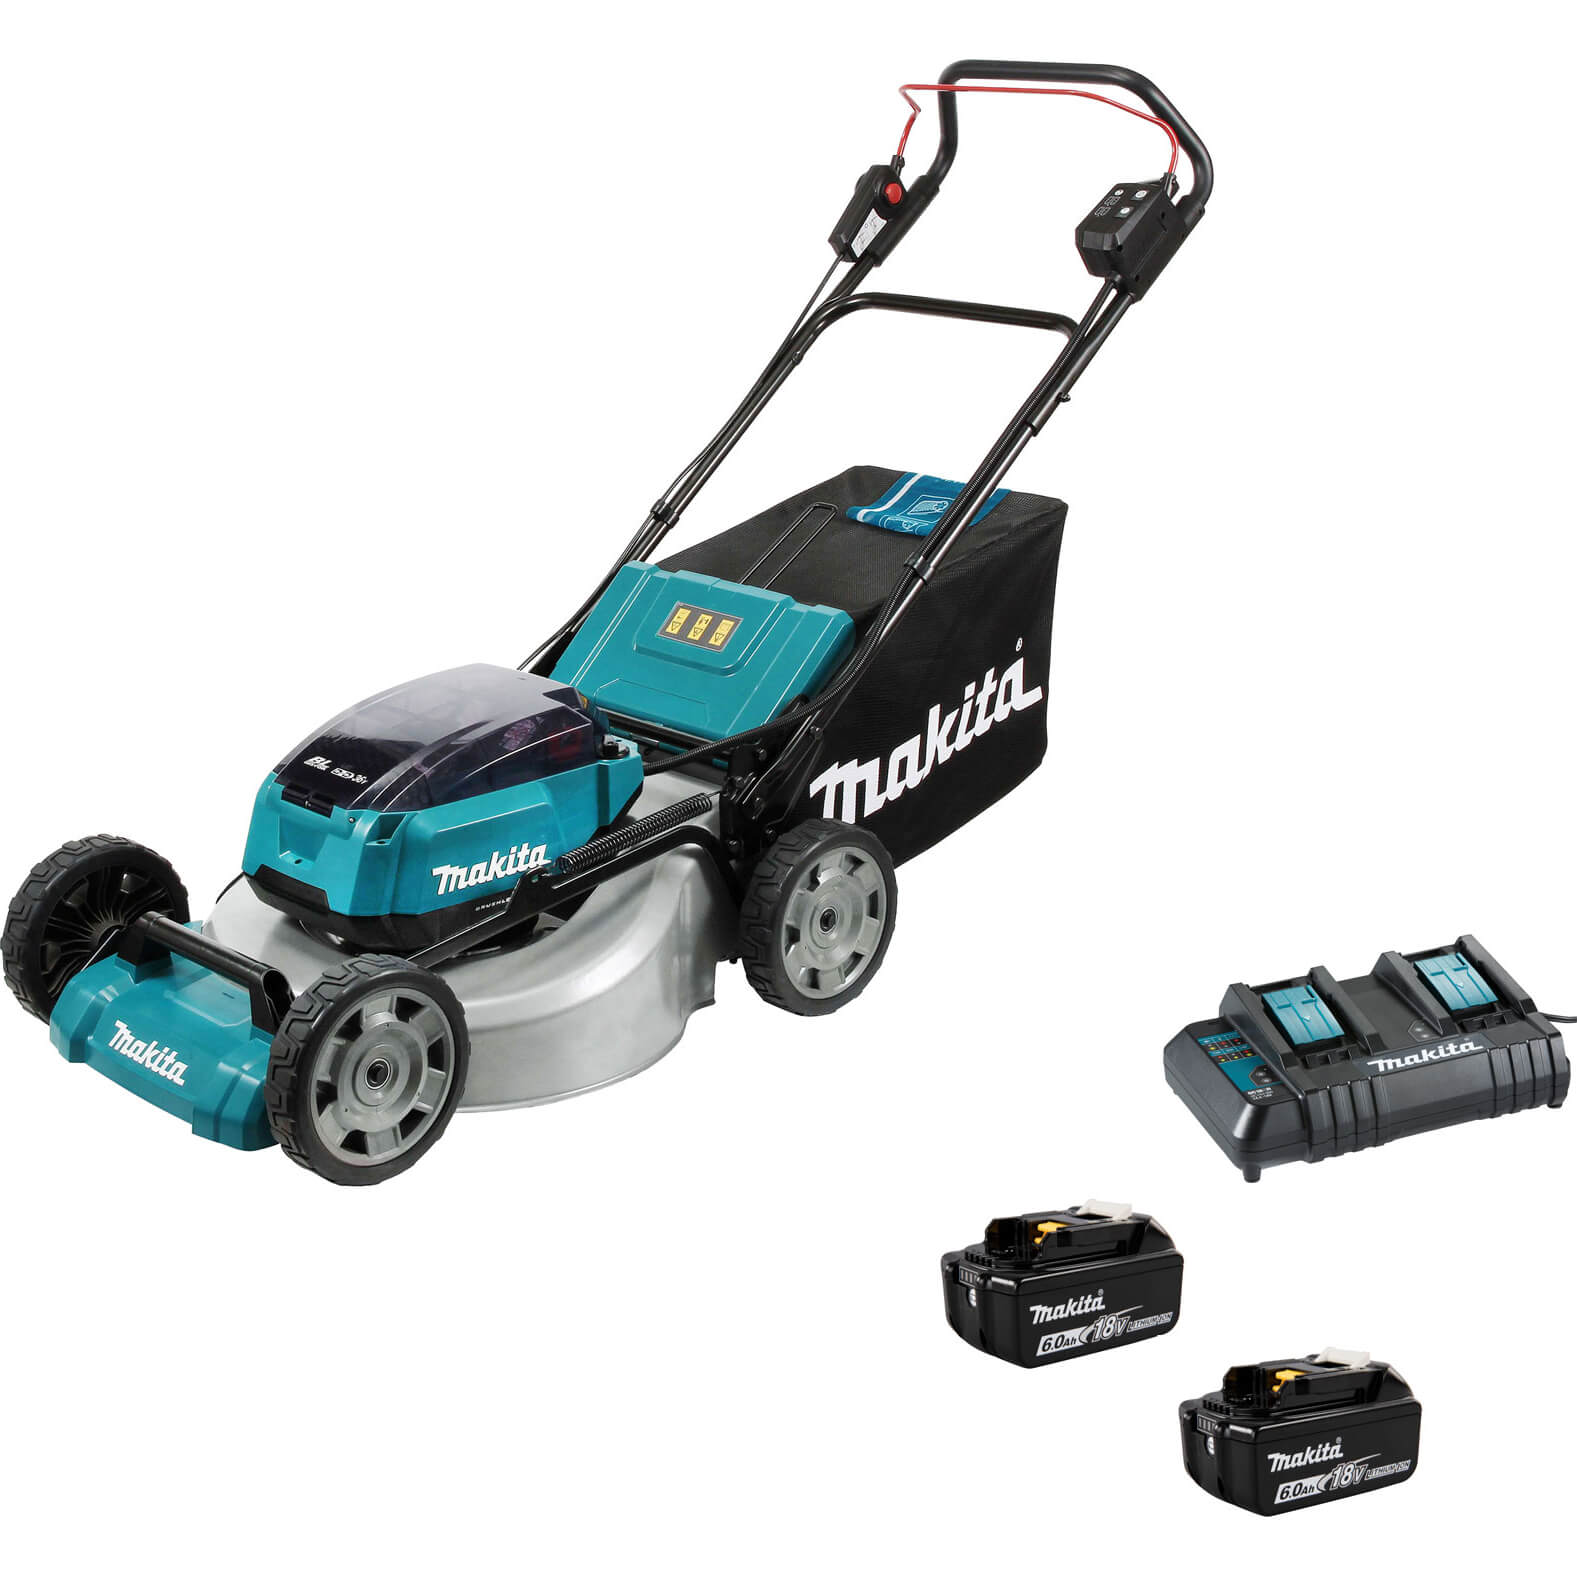 Image of Makita DLM530 Twin 18v LXT Cordless Brushless Lawnmower 530mm 2 x 6ah Li-ion Charger